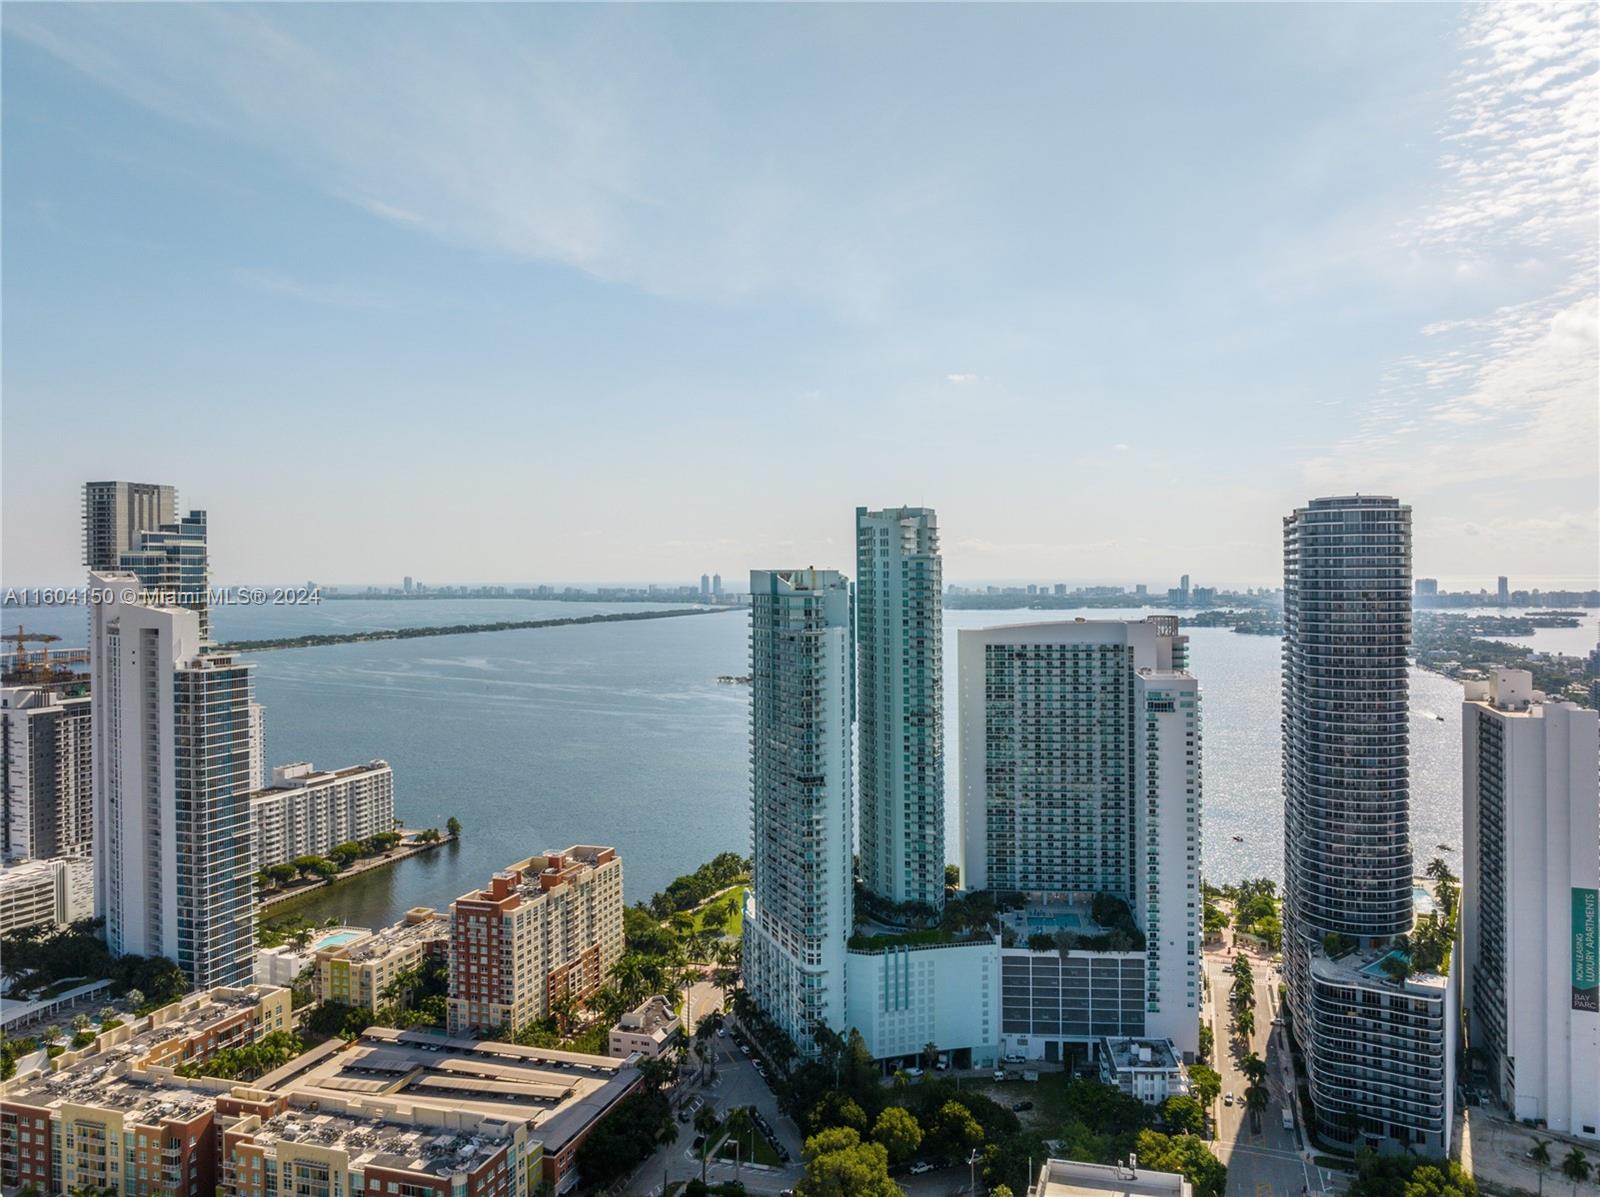 Extremely desirable Edgewater Bayfront corner unit offered with two side-by-side parking spaces. Vynel floors throughout this 2/2 at QUANTUM ON THE BAY. Stunning skyline views of Miami from this spacious unit with an open floor plan, floor-to-ceiling impact windows & doors, a walk-in closet, Italian cabinetry, stainless steel appliances, natural stone countertops, & washer/dryer! Enjoy sunsets from your SW-facing wraparound terrace. Relax in the two pools, sauna, or resident lounges, and take advantage of the two fitness centers and business centers. 24-hour security, valet parking, convenience store, and salon! Minutes from Wynwood, the Design District, museums, Publix, and Metro. Pet-friendly building facing Margaret Pace Park.